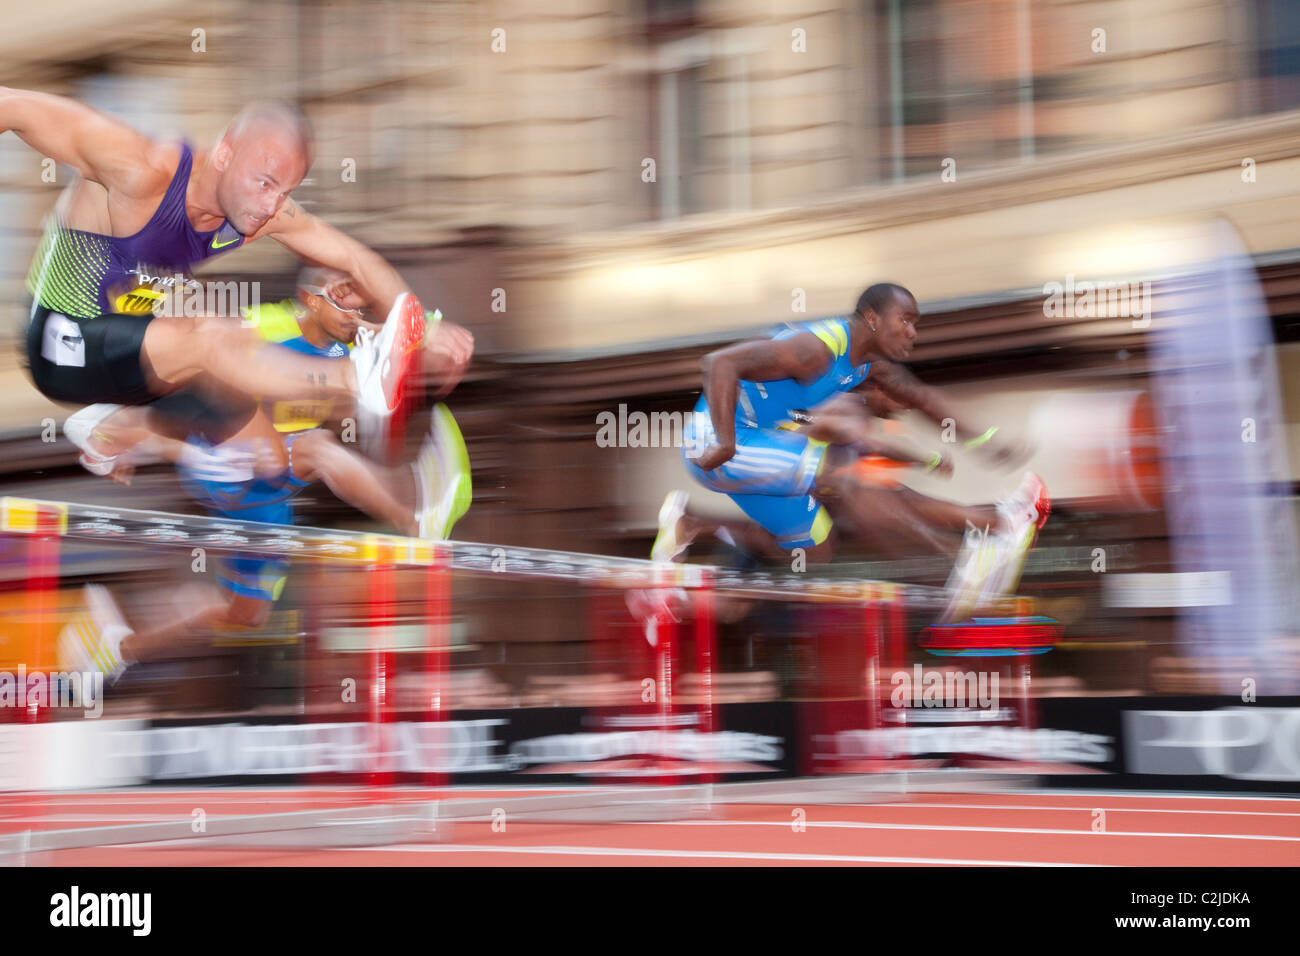 Andy Turner races Terrence Trammell and felix sanchez in the 110m hurdles at Manchester Great City Games 2010 on deansgate. Stock Photo